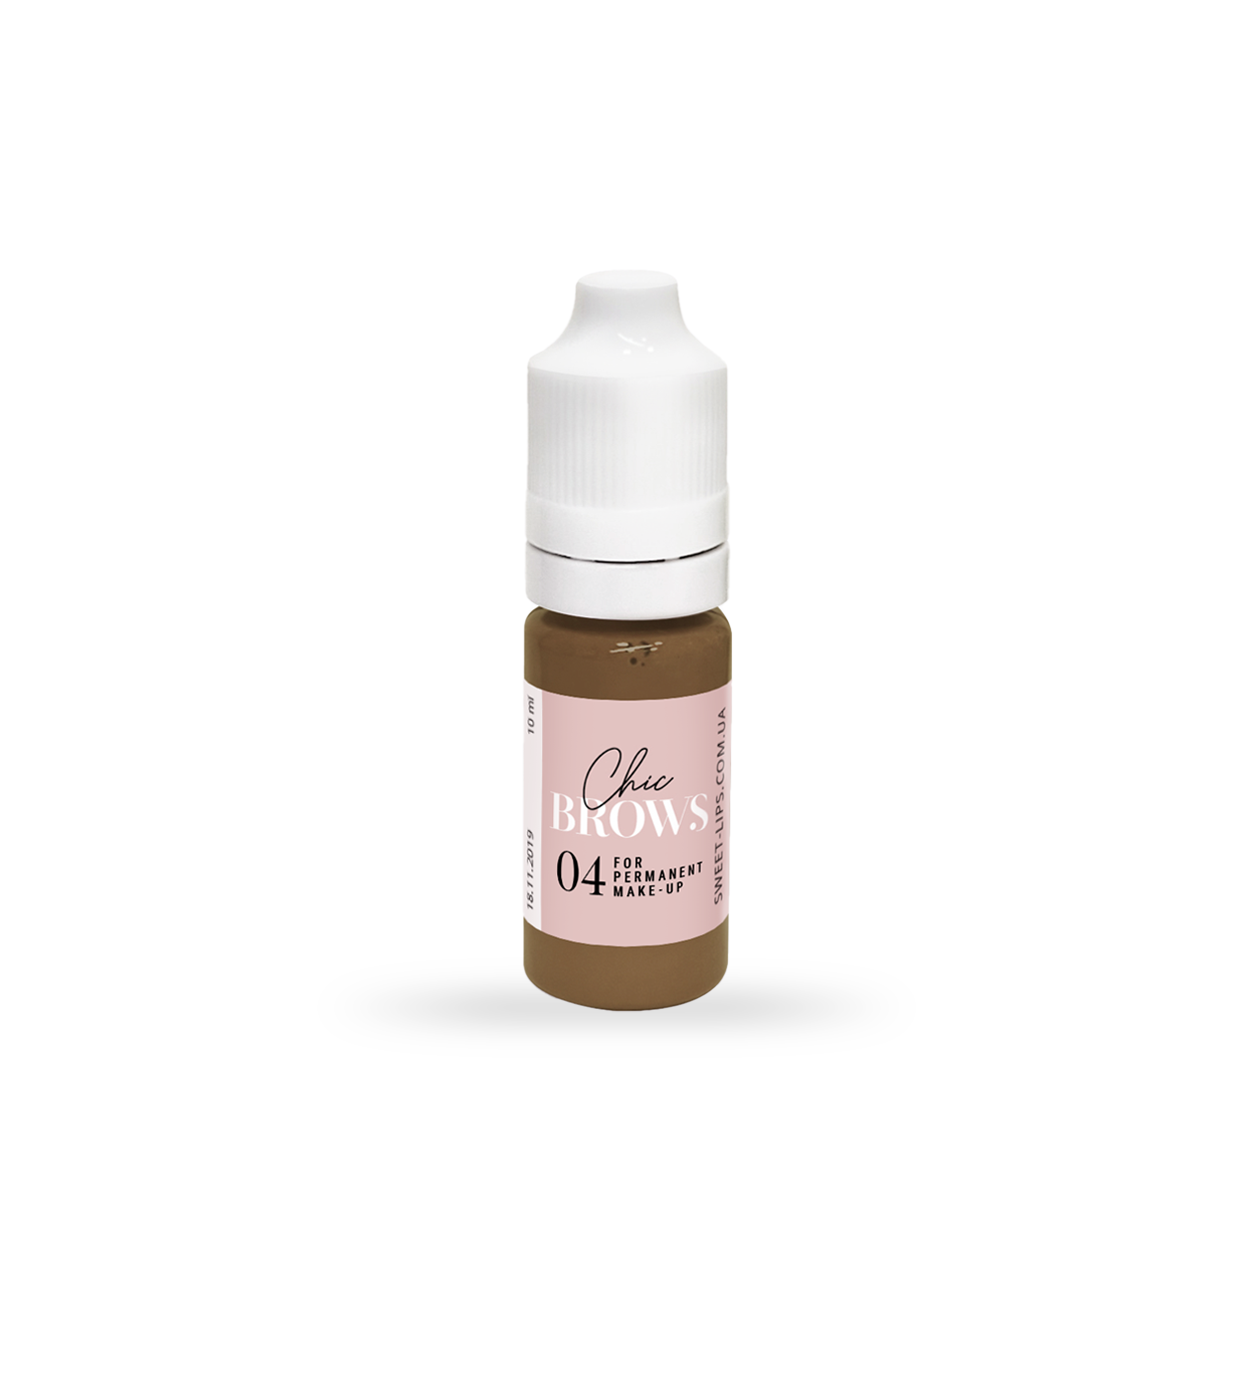 Chic Brows No.4 5ml